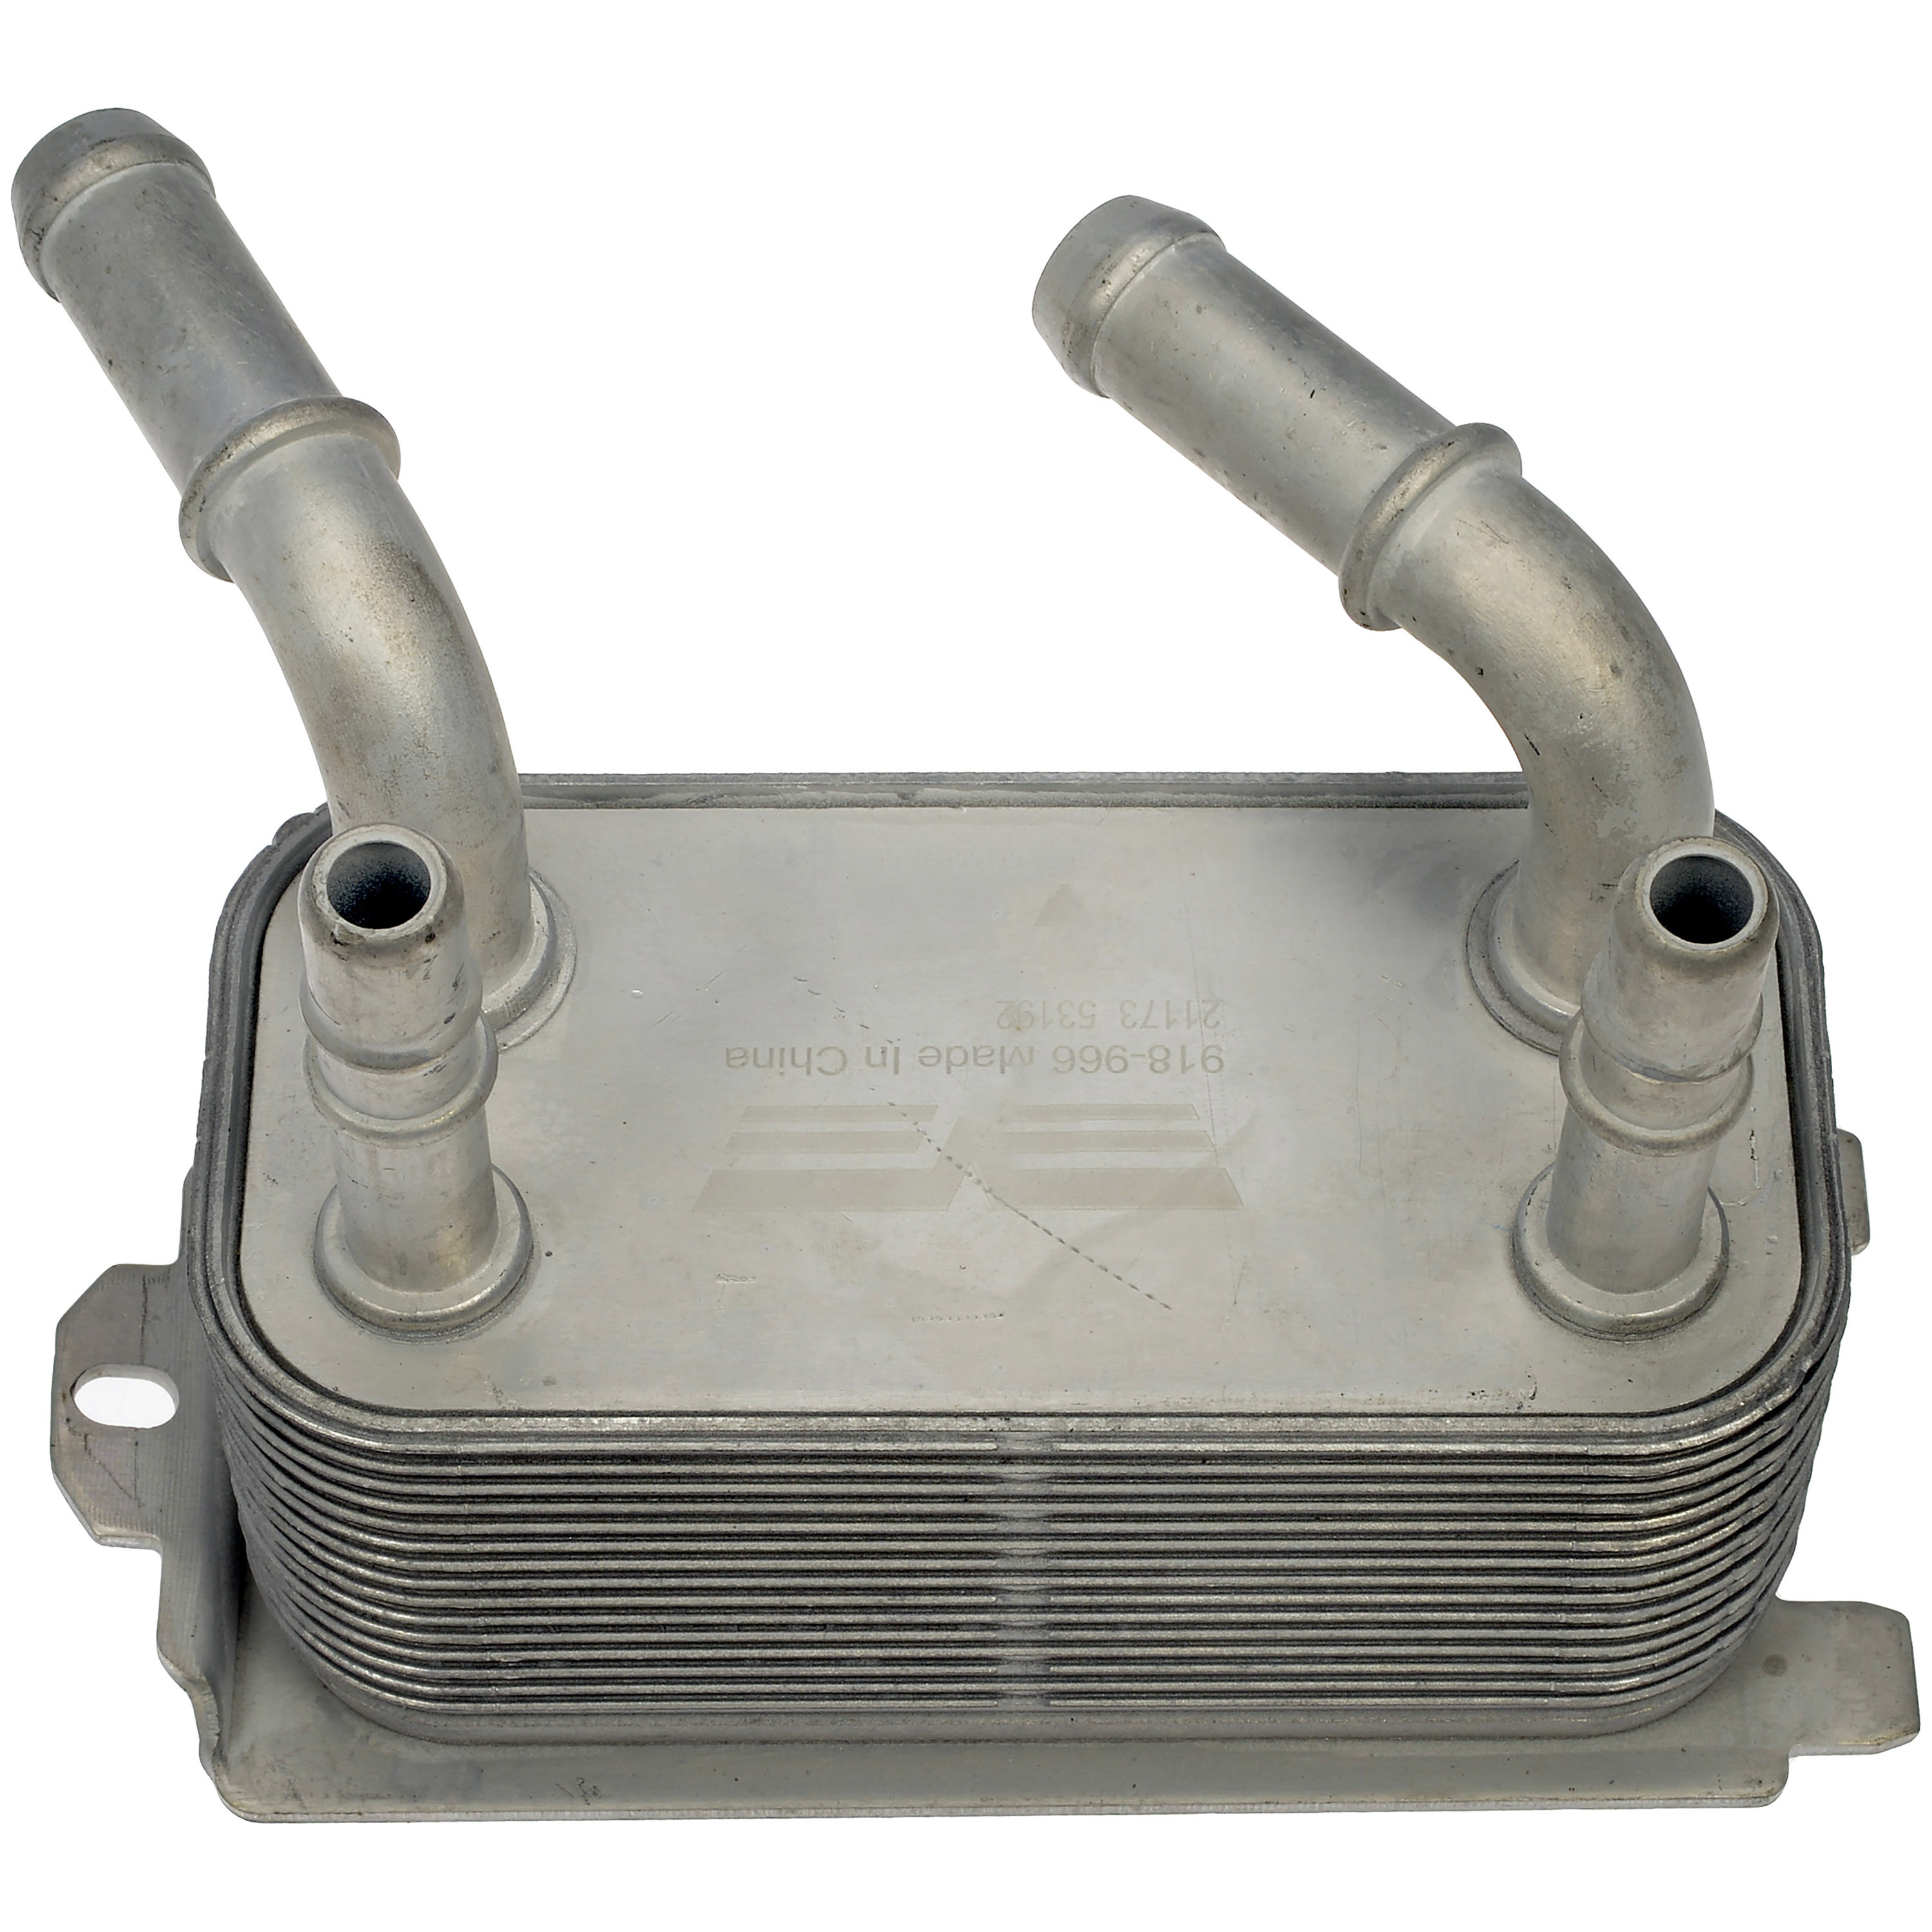 Dorman 918-966 Automatic Transmission Oil Cooler for Specific Ford Models - image 4 of 4